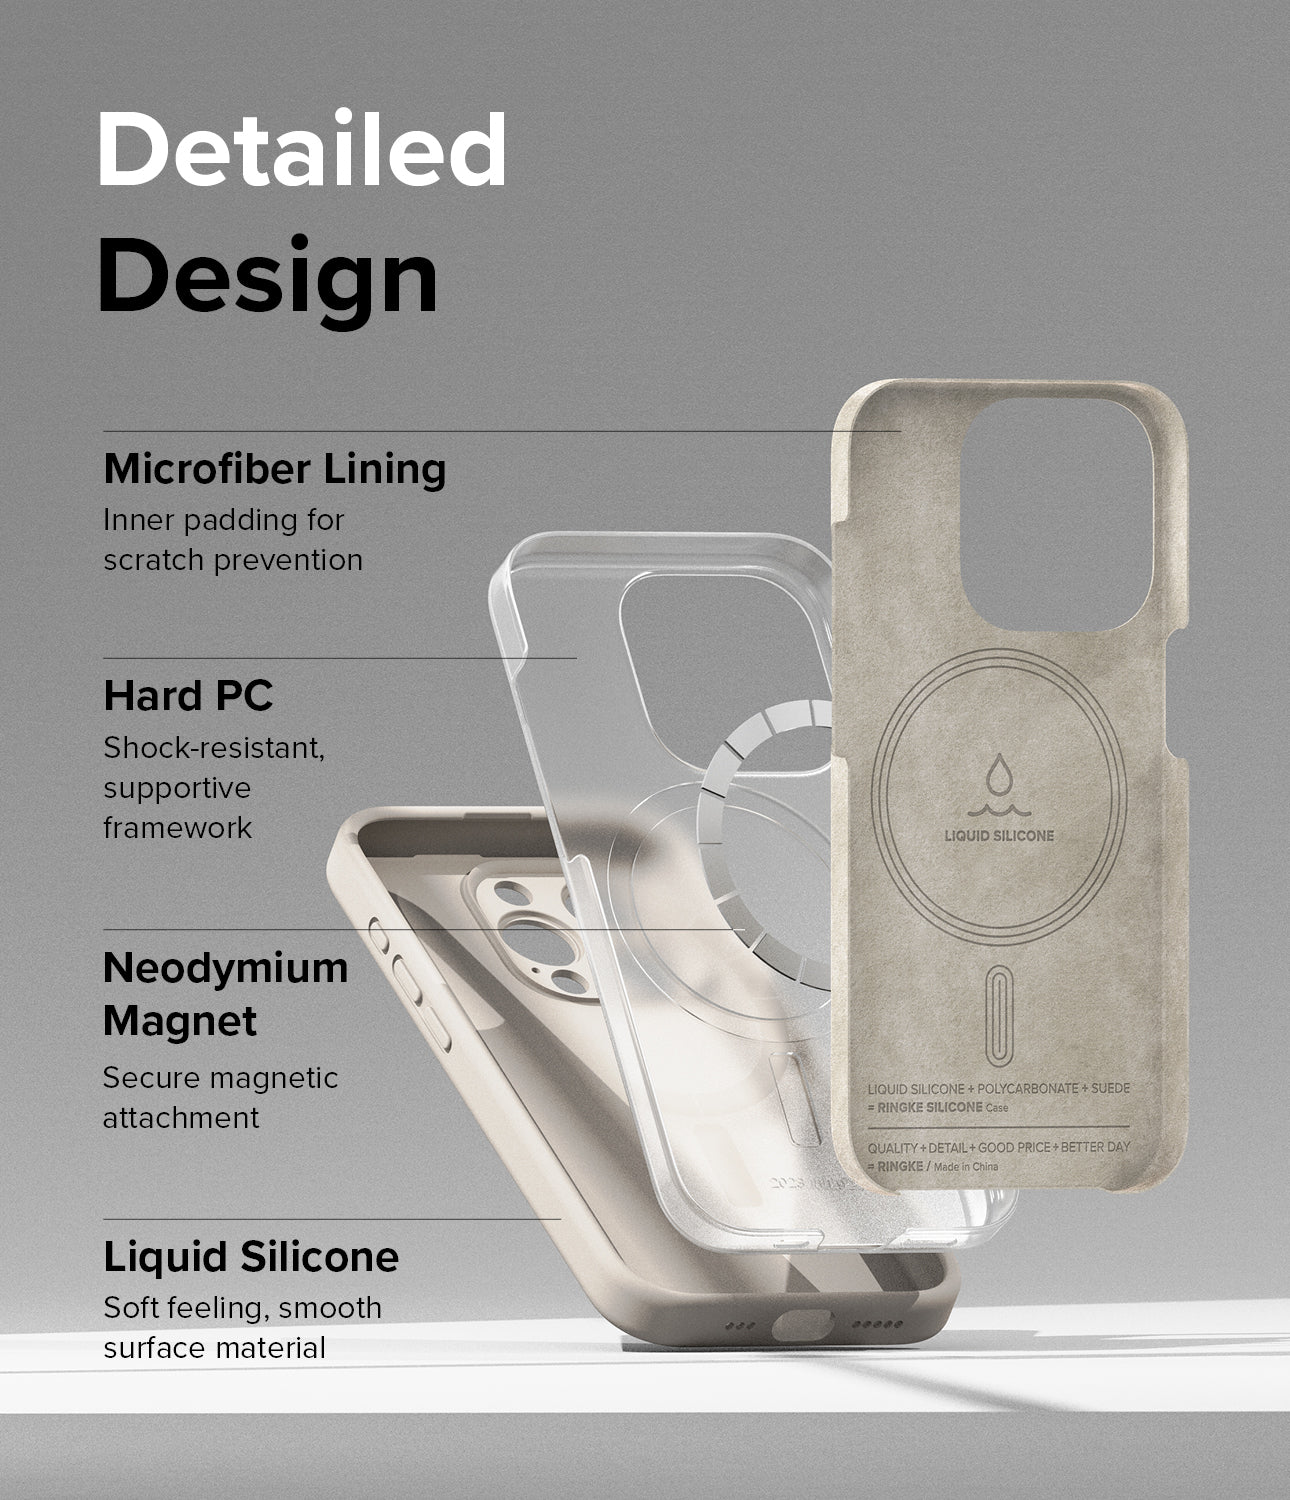 iPhone 15 Pro Case | Silicone Magnetic - Stone - Detailed Design. Inner padding for scratch prevention with Microfiber Lining. Shock-resistant, supportive framework with Hard PC. Neodymium Magnet for secure magnetic attachment. Soft feeling, smooth surface Liquid Silicone.